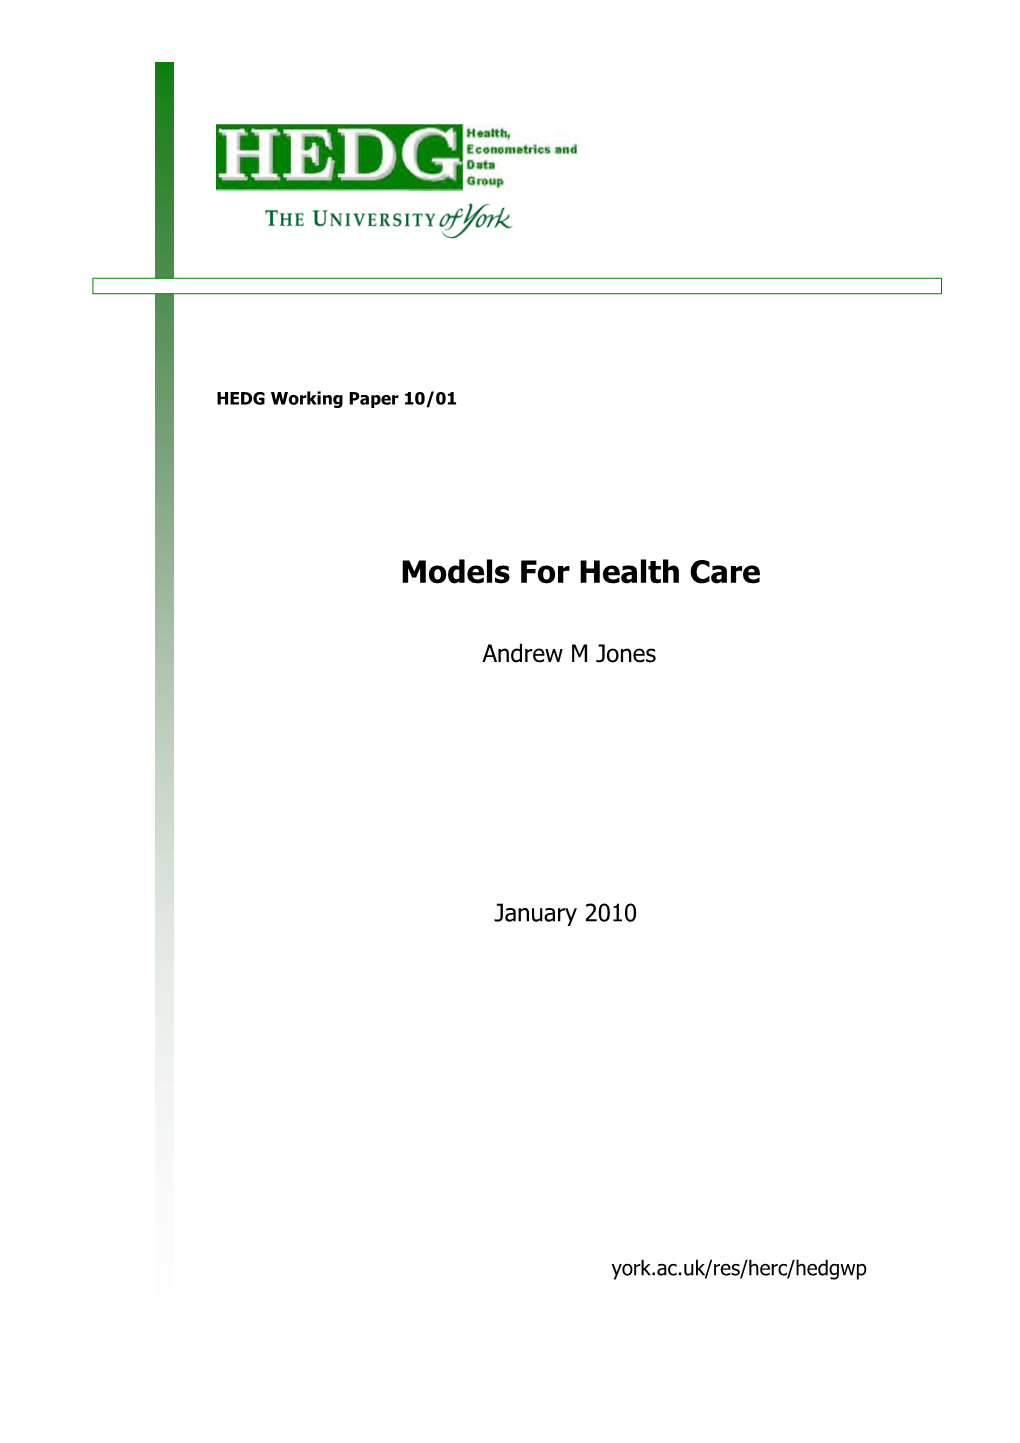 Models for Health Care